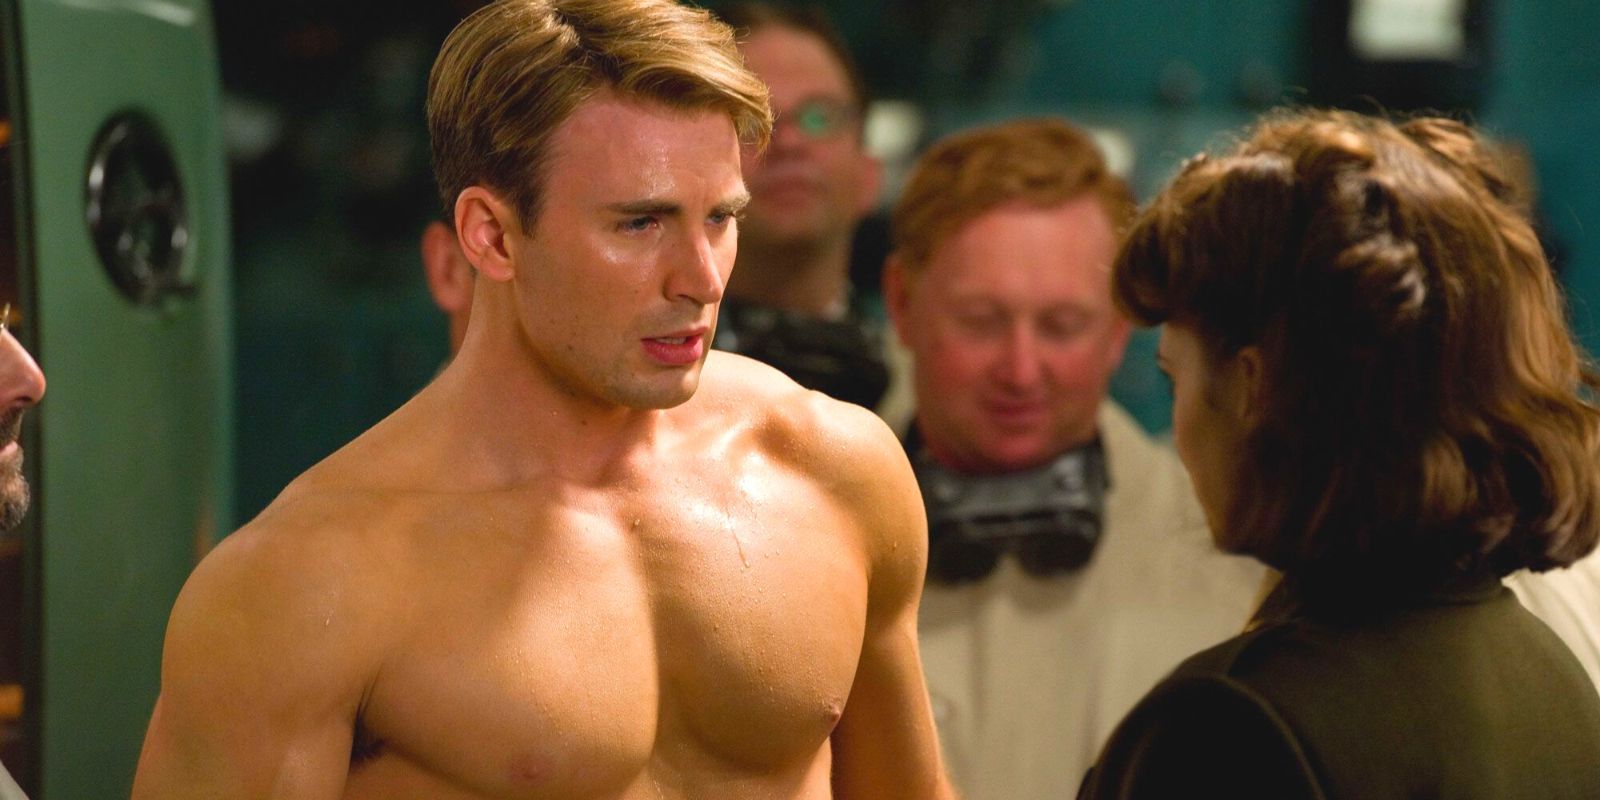 A shirtless Chris Evans in Captain America: The First Avenger